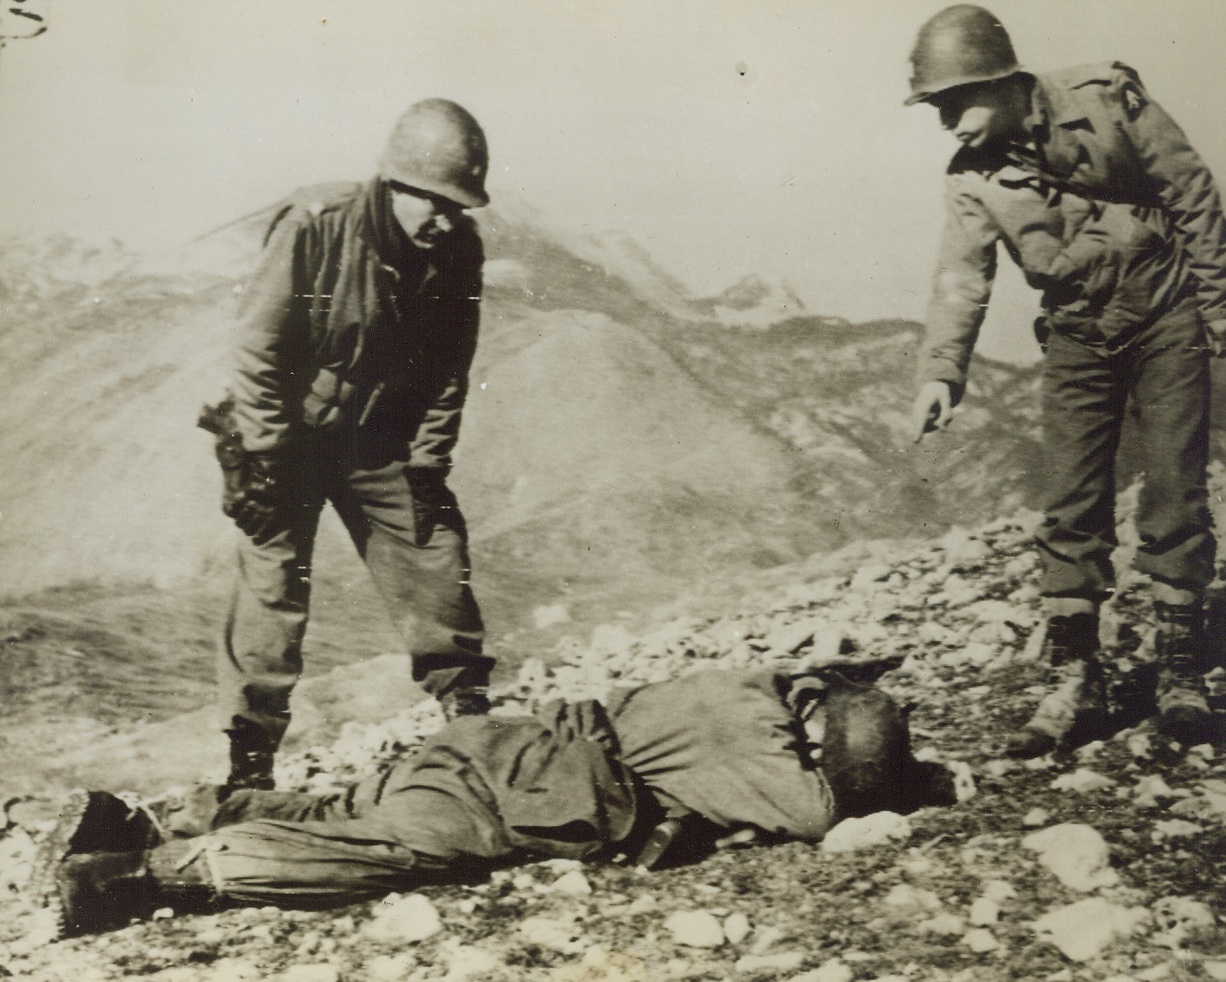 DEATH ON THE ROAD TO ROME, 1/18/1944. CERASUOLO, ITALY—His fleeing comrades left this German soldier to be buried by the Allies, as the Nazis beat a hurried retreat in the Cerasuolo area. The dead German was found by Lt. Col. H. I. Ketchum (left) of Abbottsford, Wisc., and Captain R. L. Johnson, of a field artillery battalion, who were on a reconnaissance mission.Credit: Signal Corps Radiotelephoto from Acme;